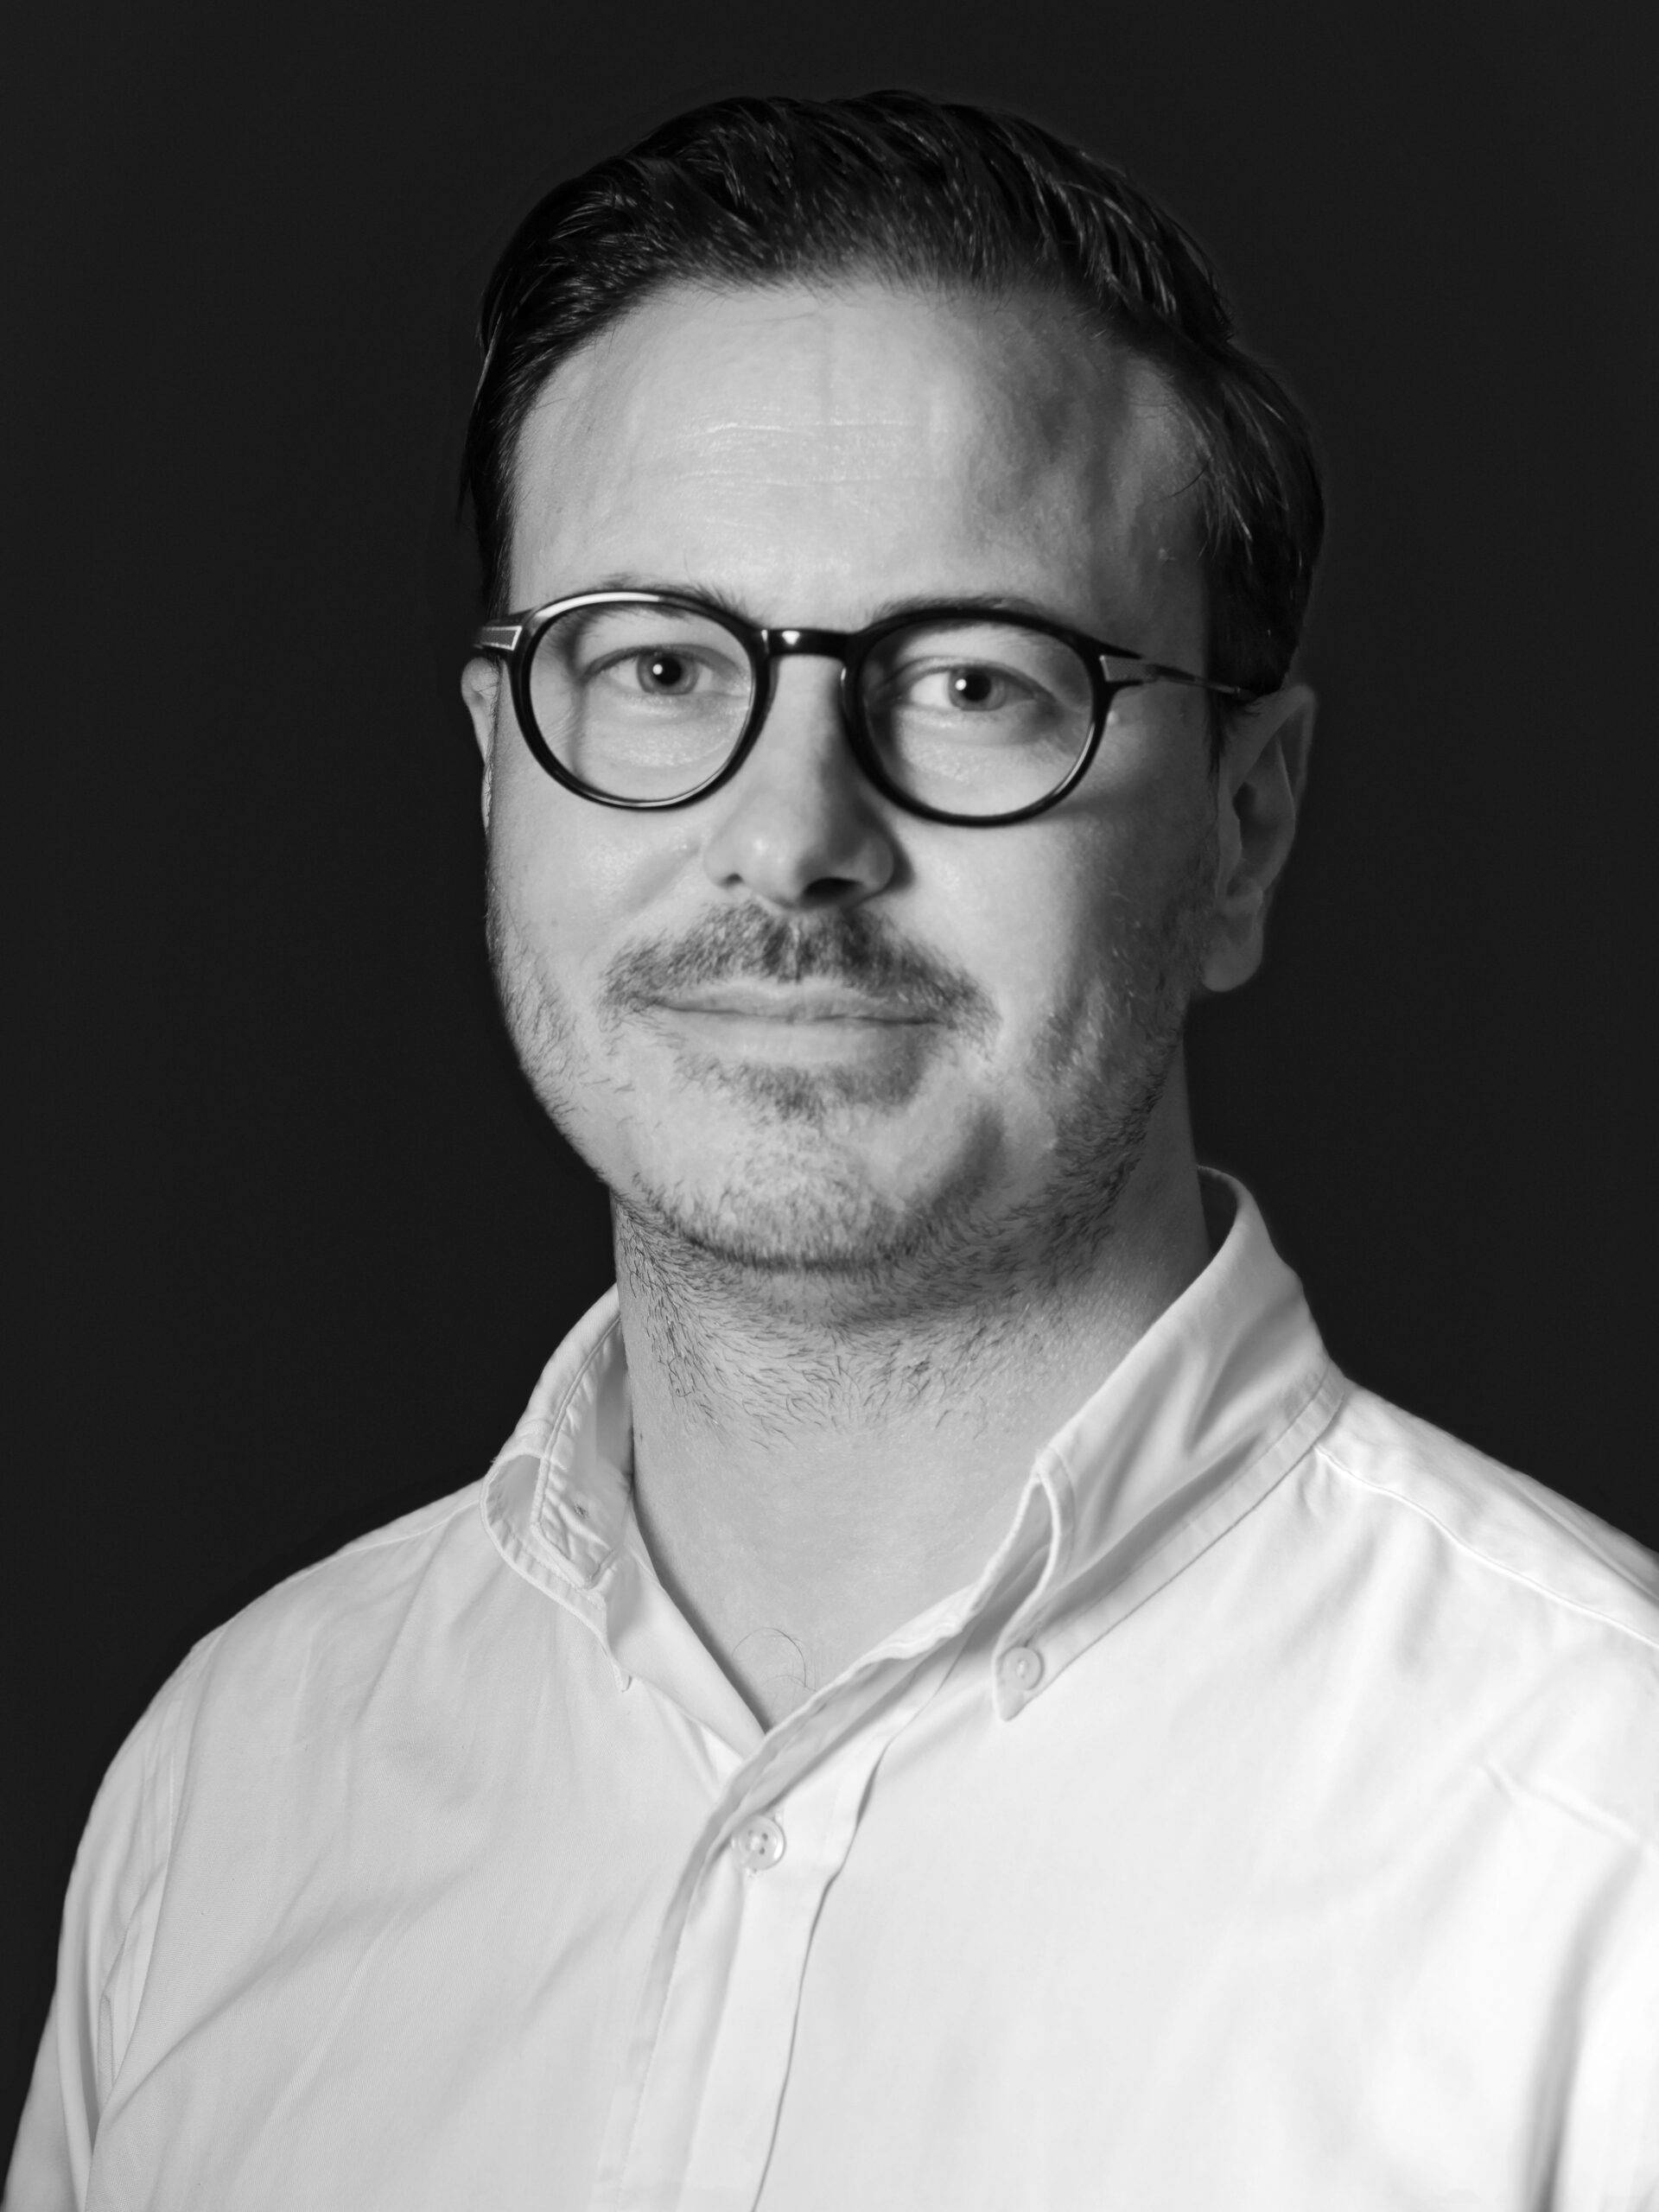 A black and white photo of a man wearing glasses posing for a headshot